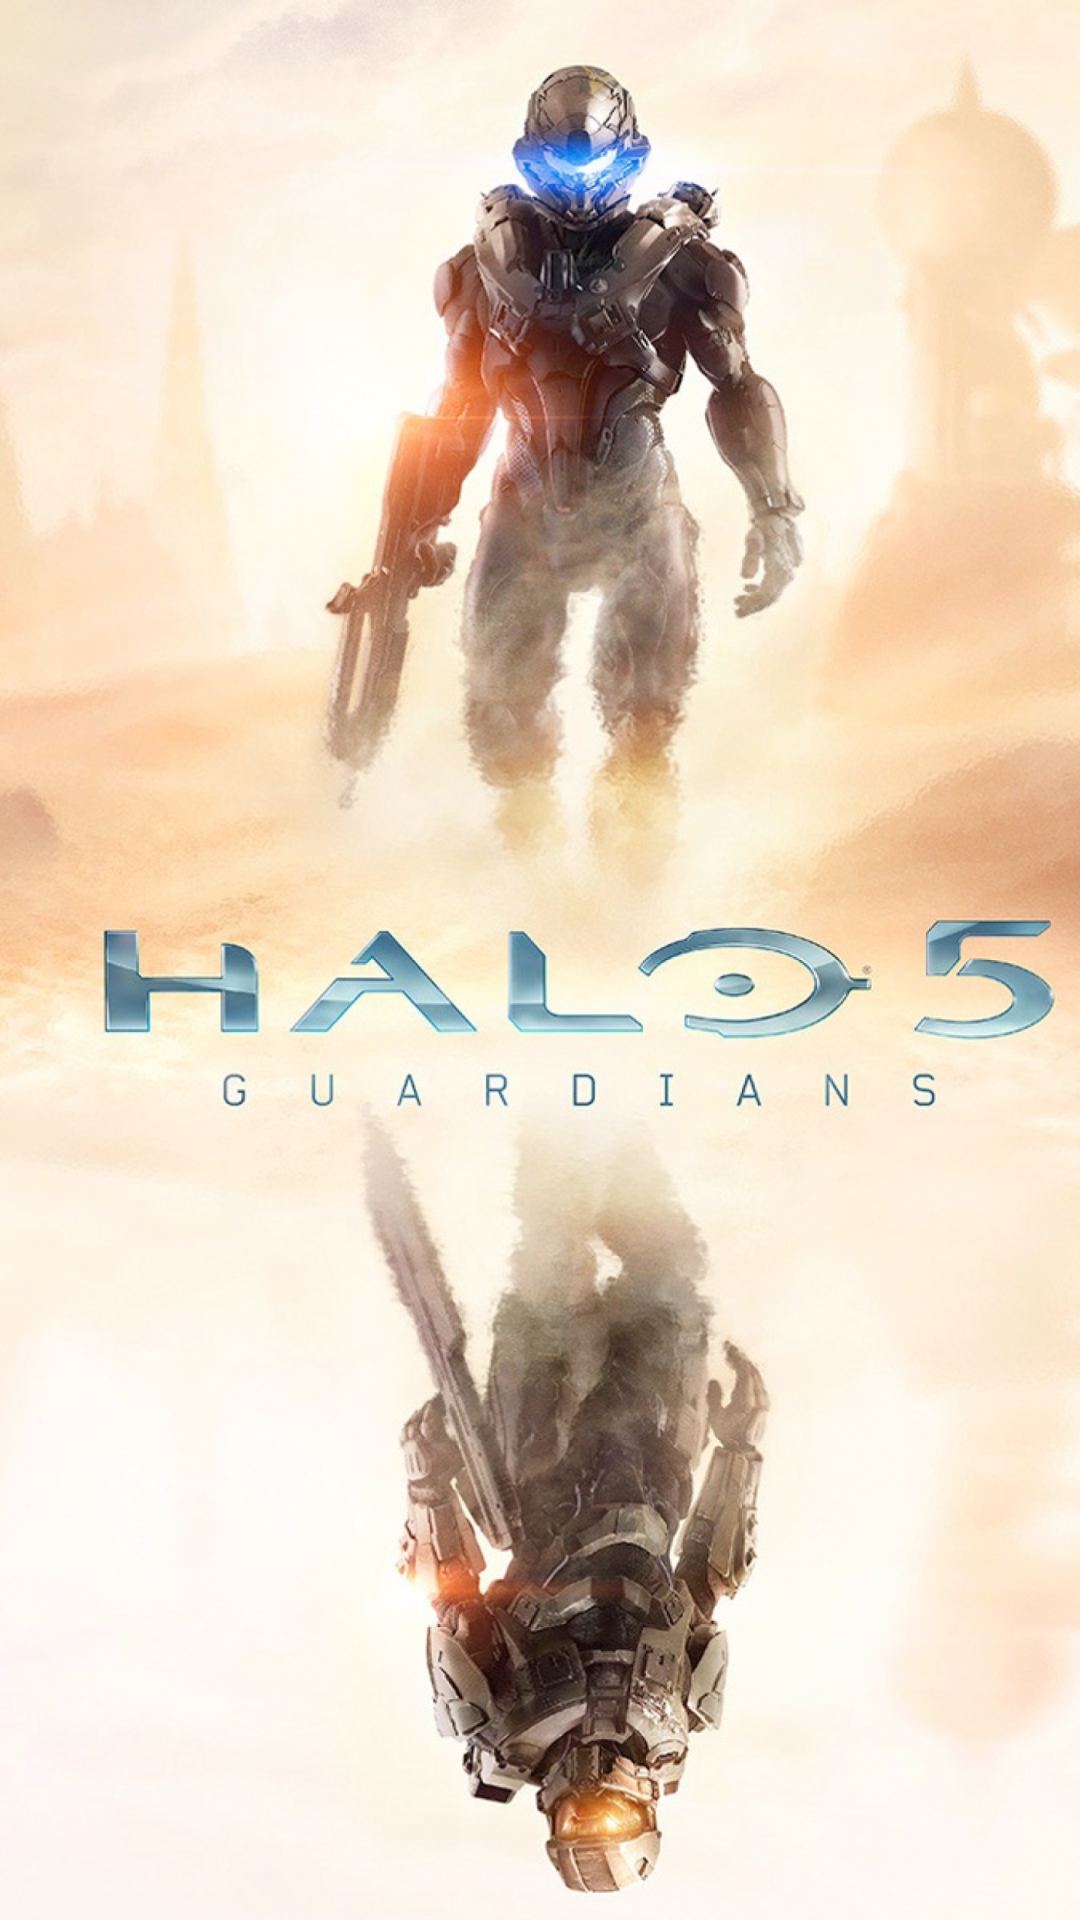 Halo 5 Guardians 2015 Game wallpaper 1080x1920